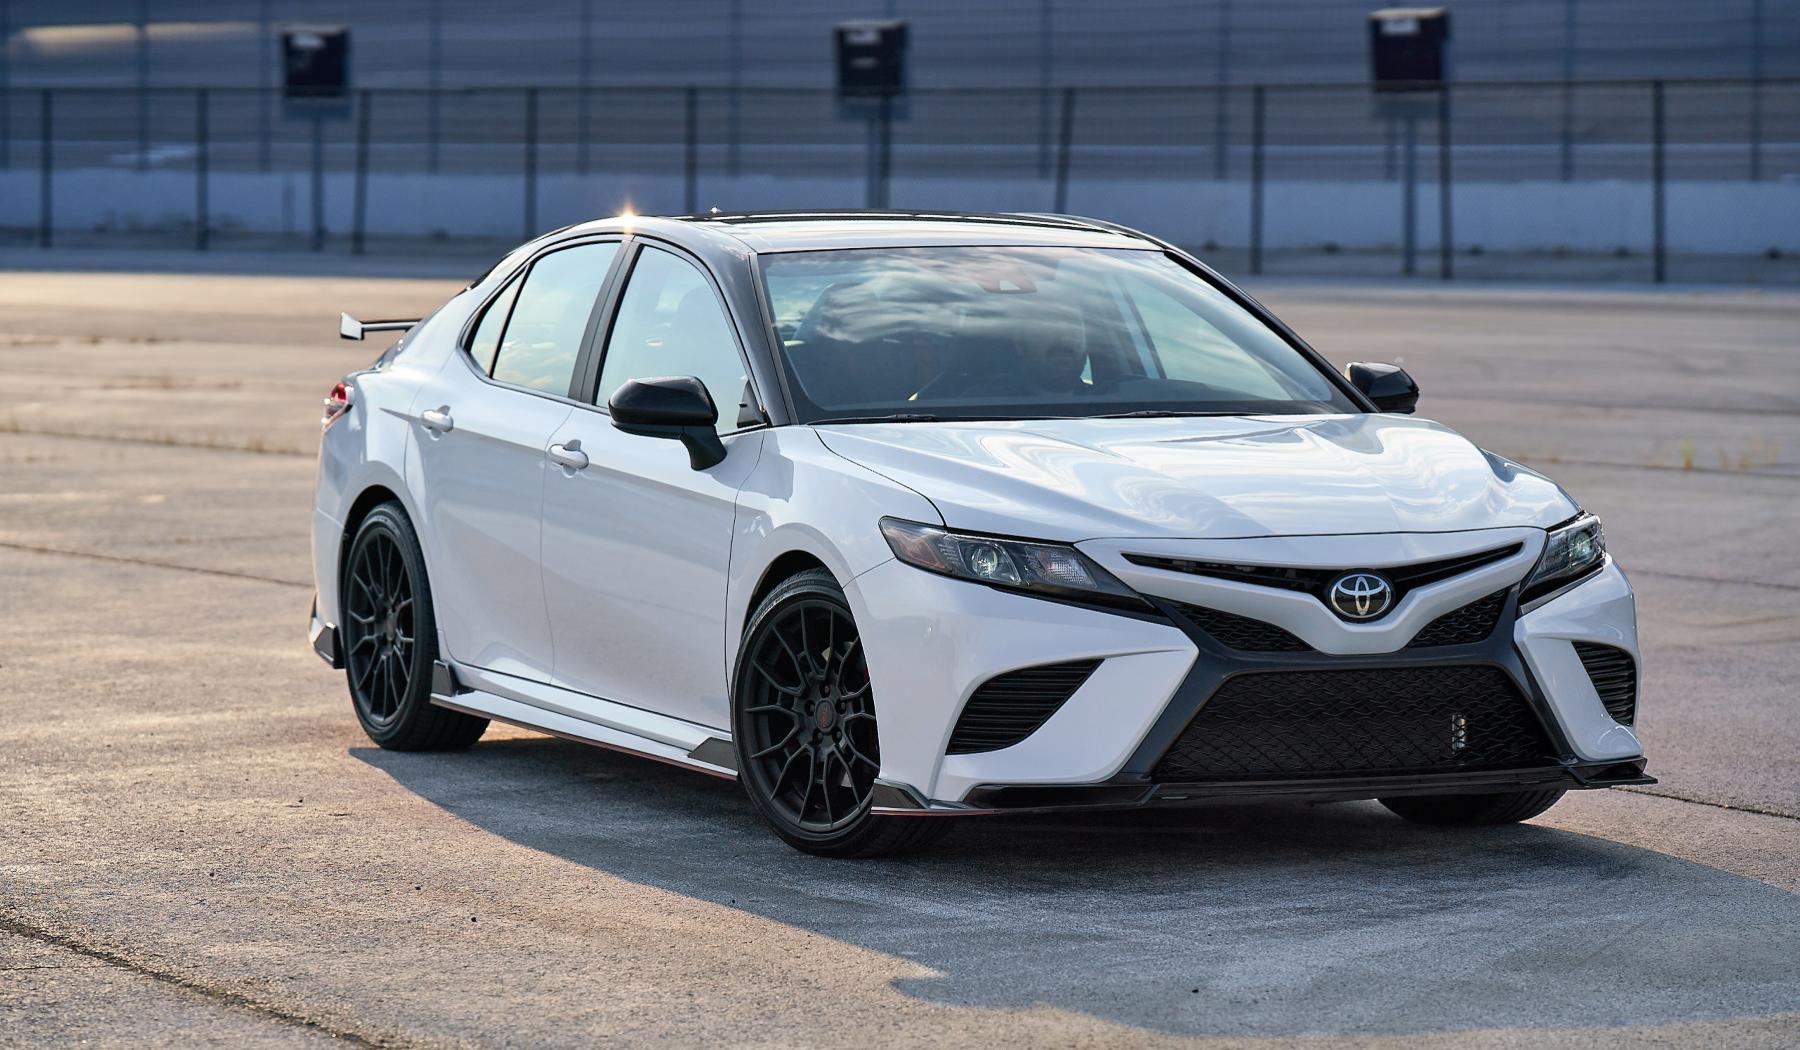 This Is Why the Camry TRD Is One of 2021's Best Sports Sedans for Under